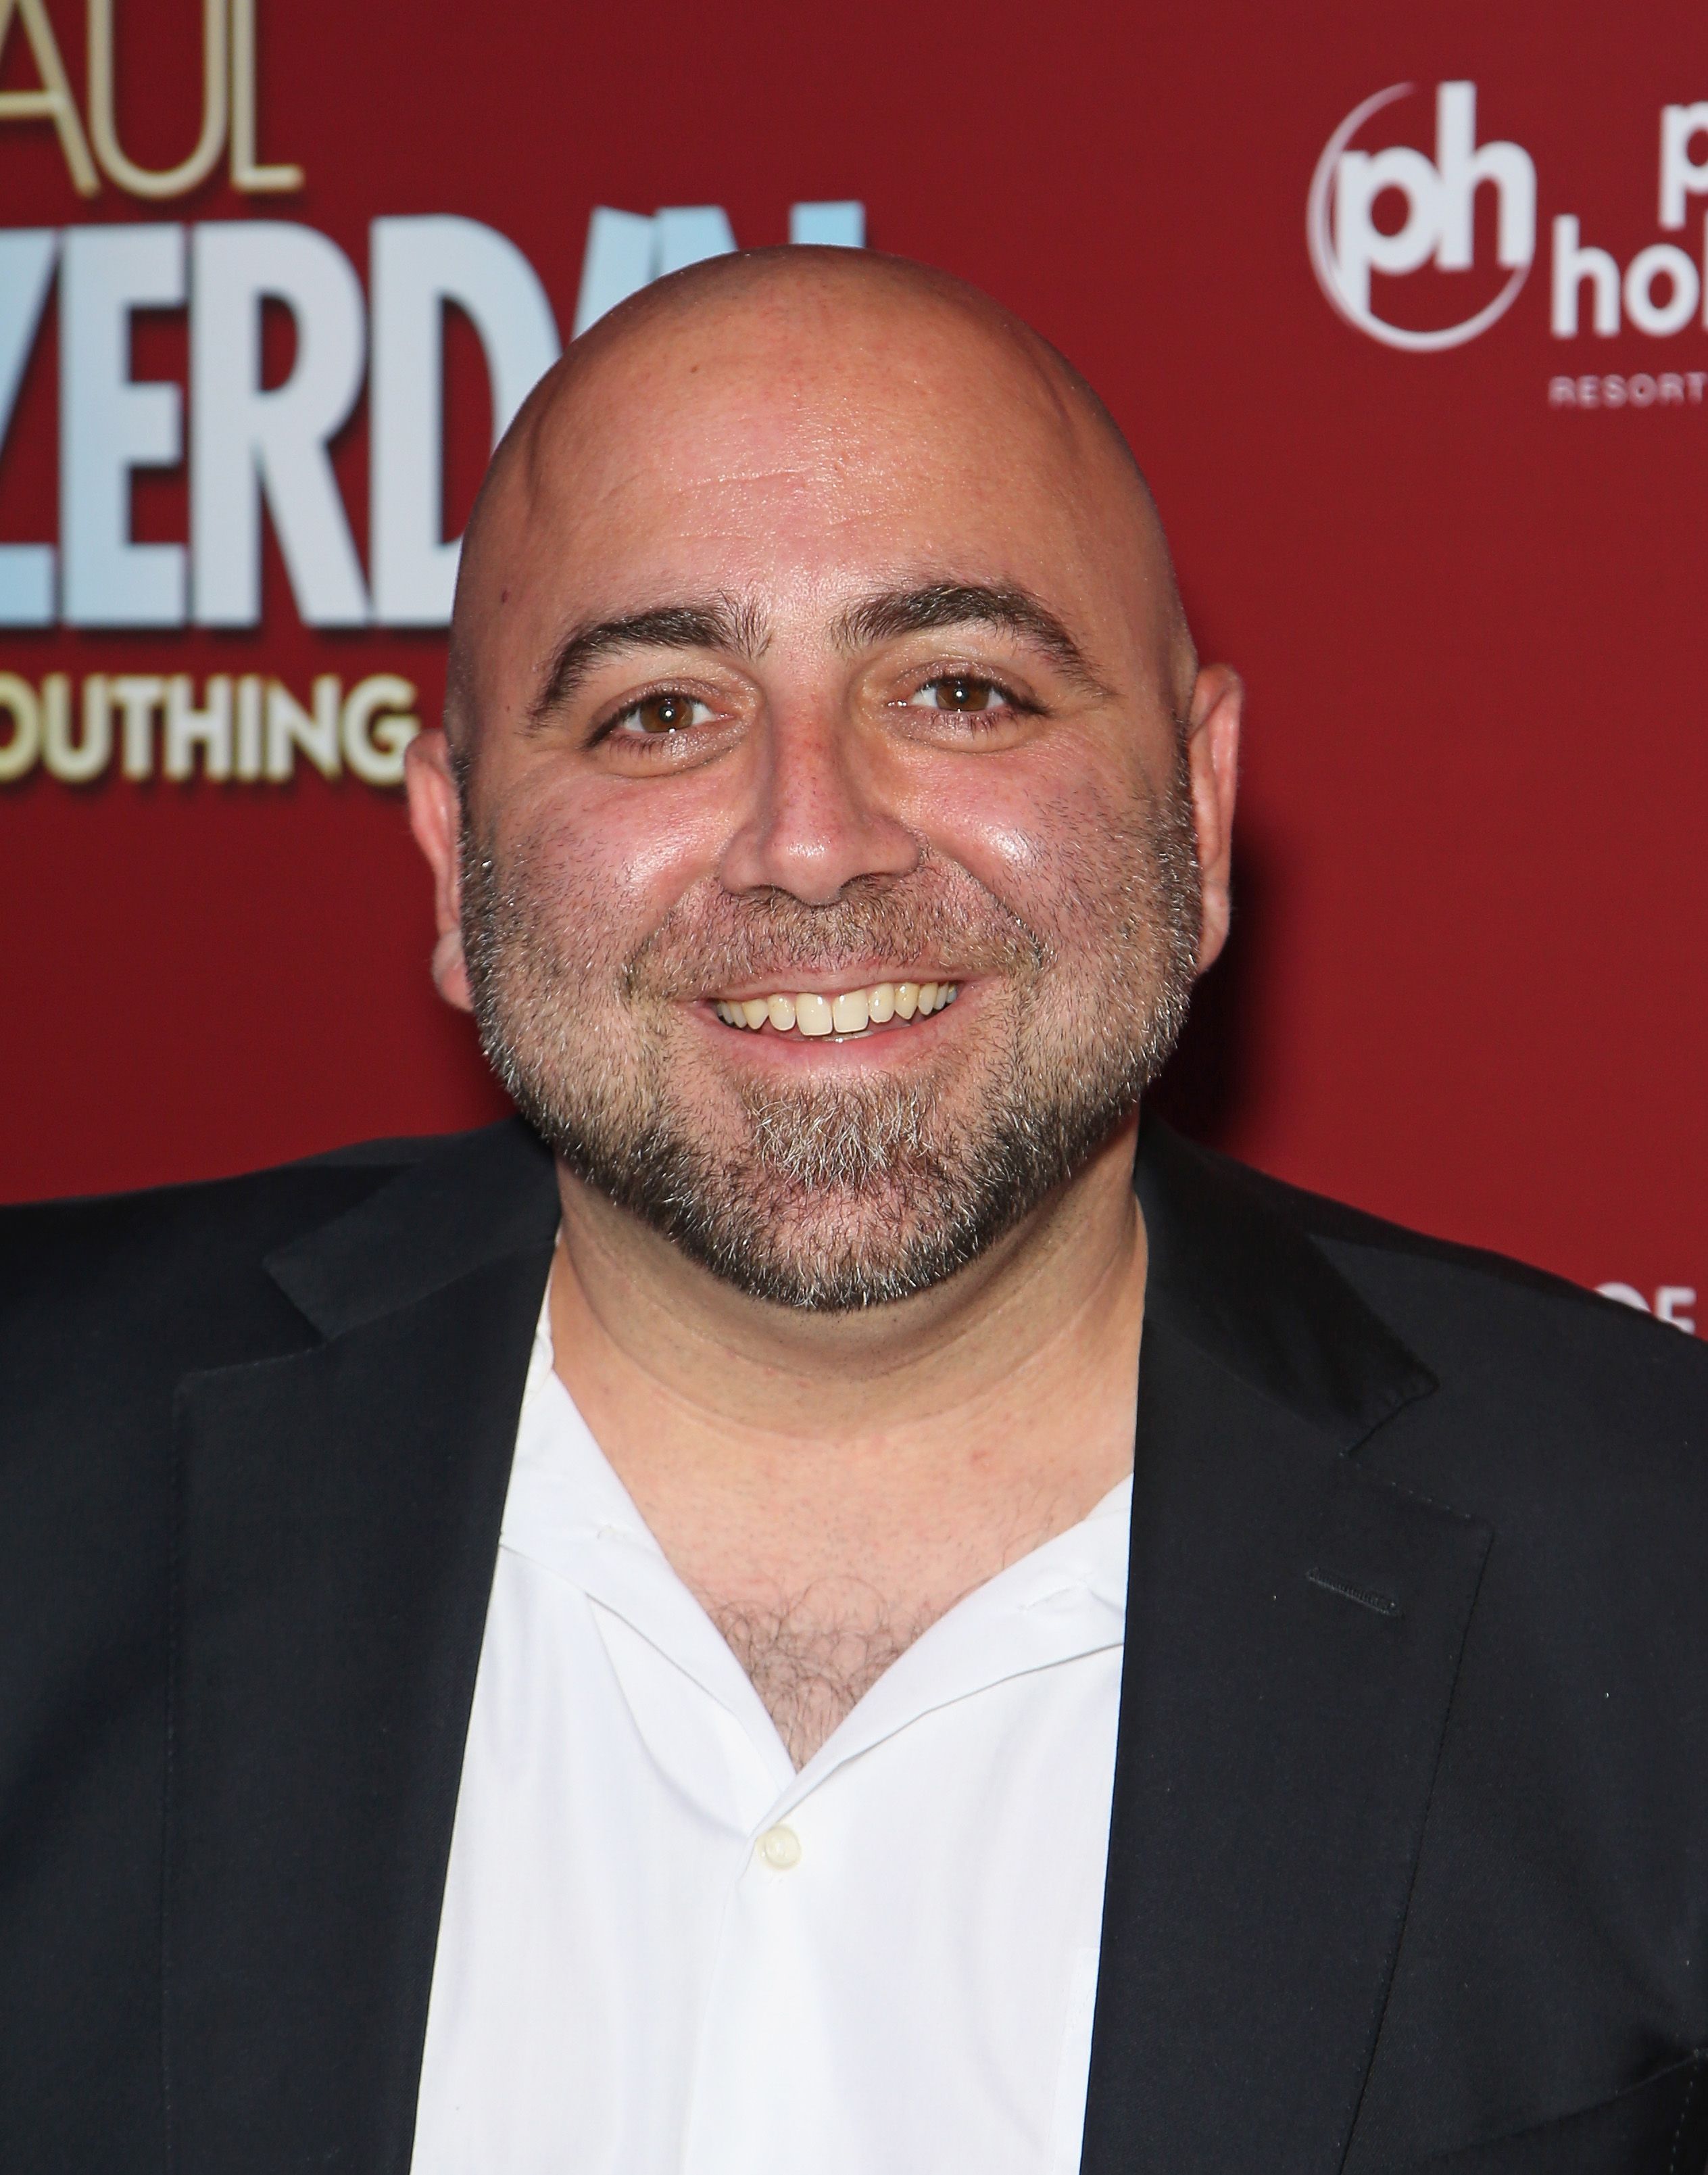 Duff Goldman at the opening night of "Paul Zerdin: Mouthing Off" in Las Vegas on May 13, 2016 | Getty Images